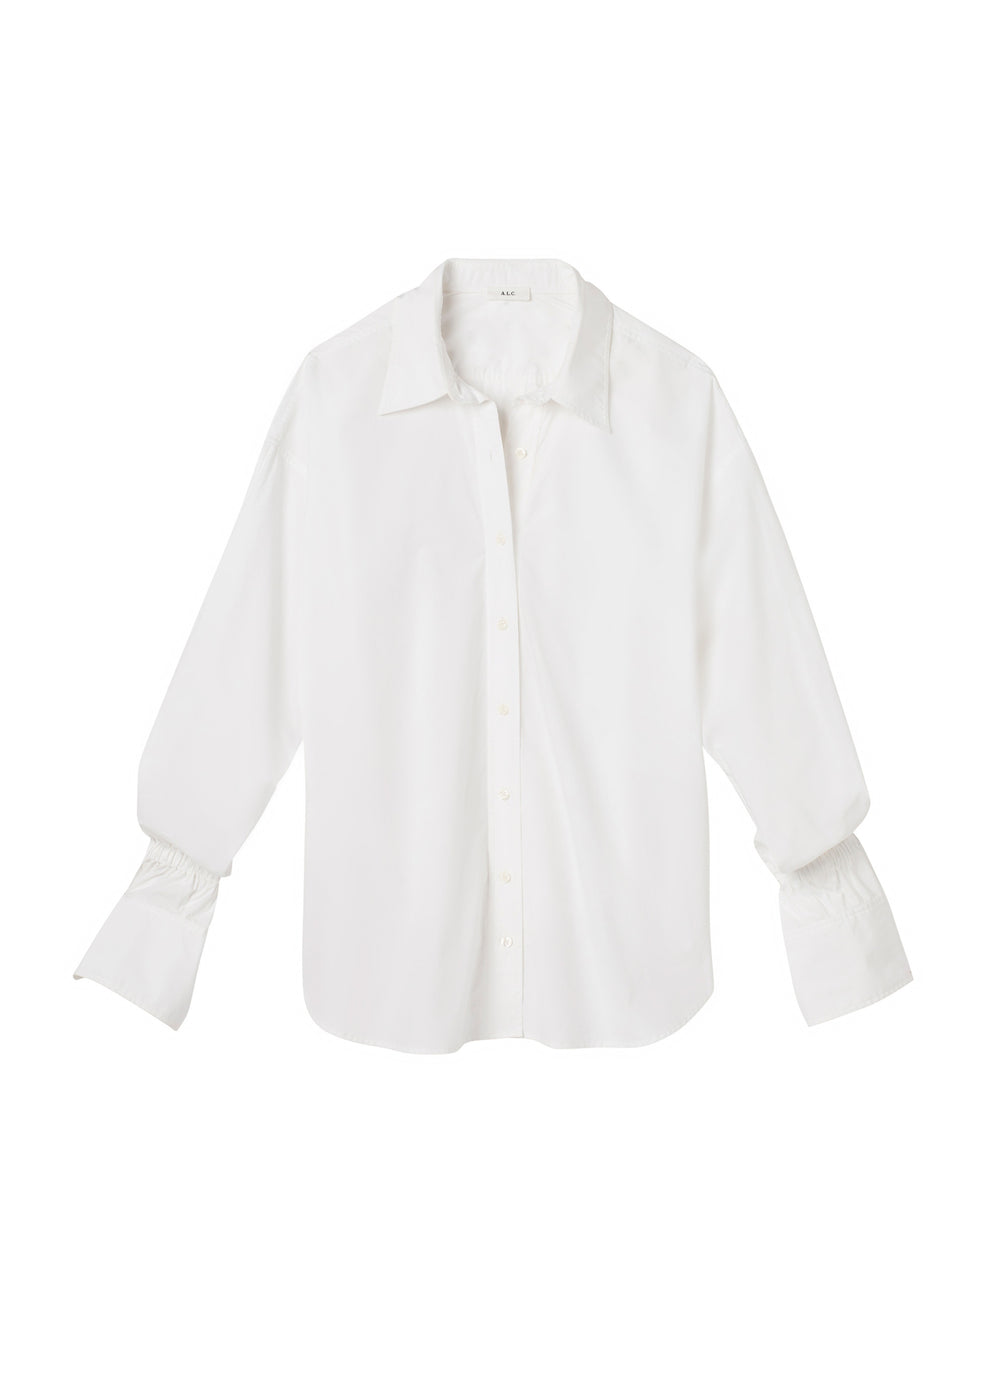 flat lay of white button down shirt